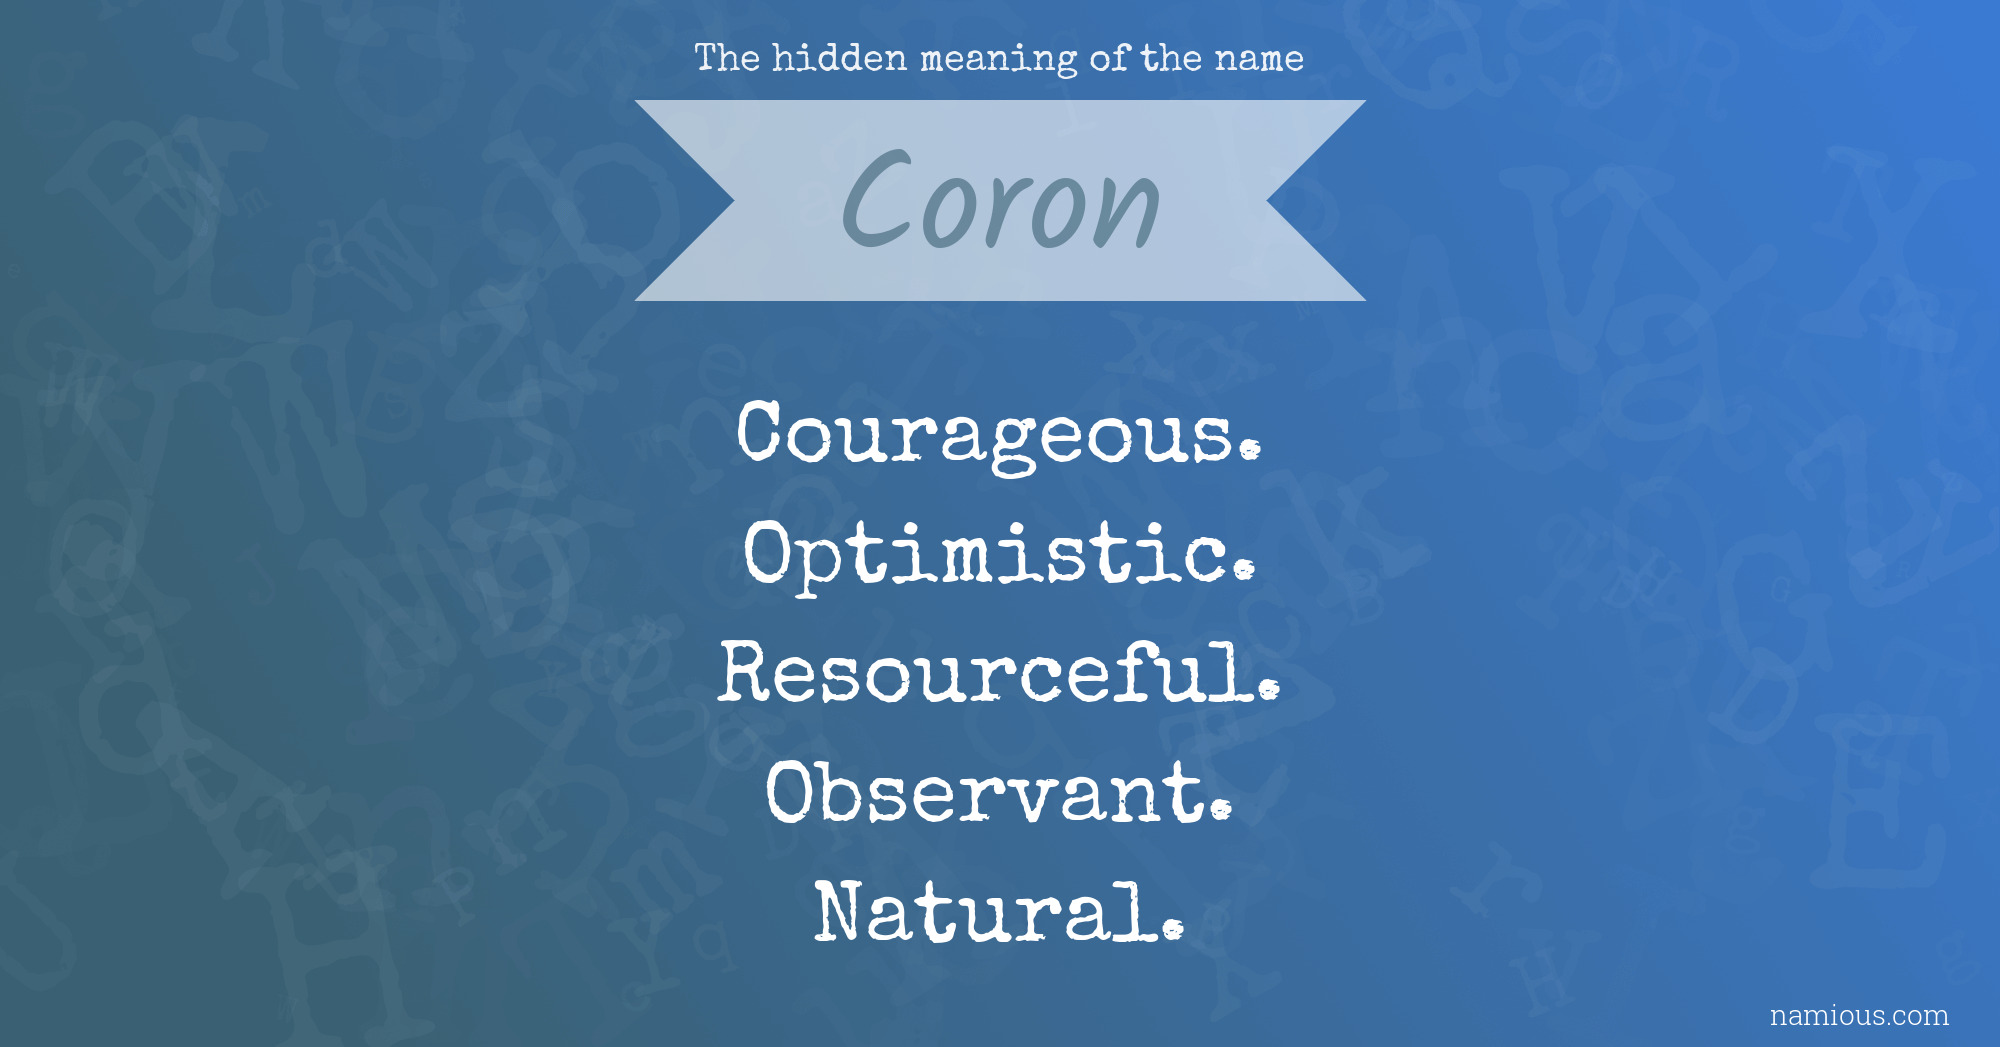 The hidden meaning of the name Coron